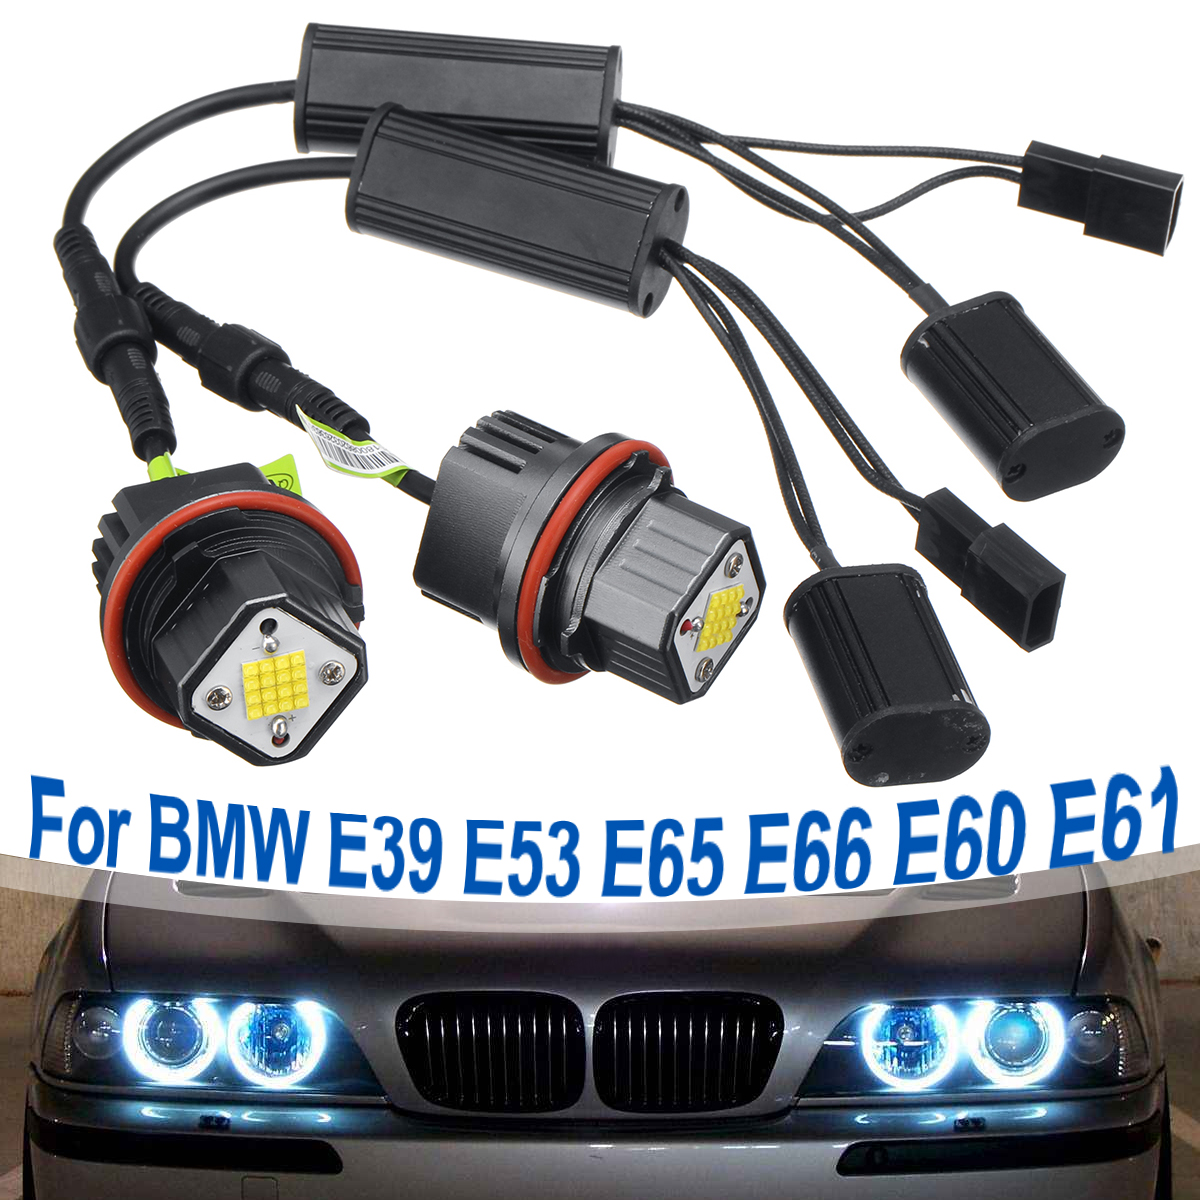 160W SMD Led cool White Headlight DRL Angel Eye Halo Ring Bulb For BMW E39 E60 